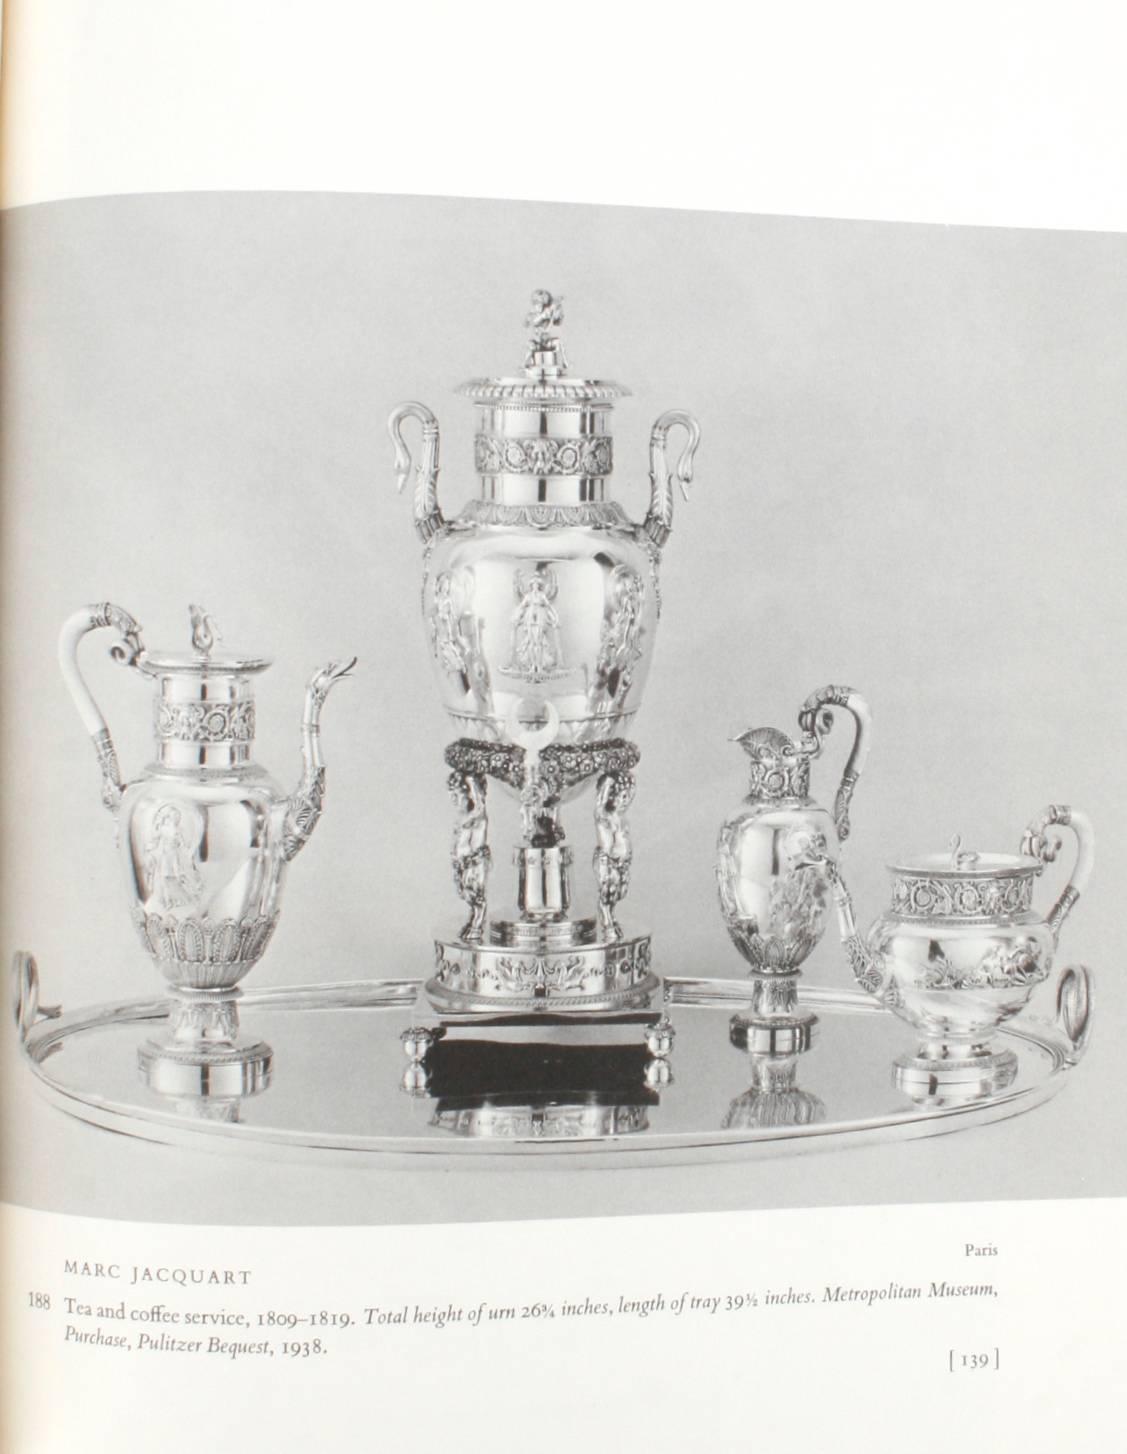 Met Museum of Art, Three Centuries of French Domestic Silver I & II 1